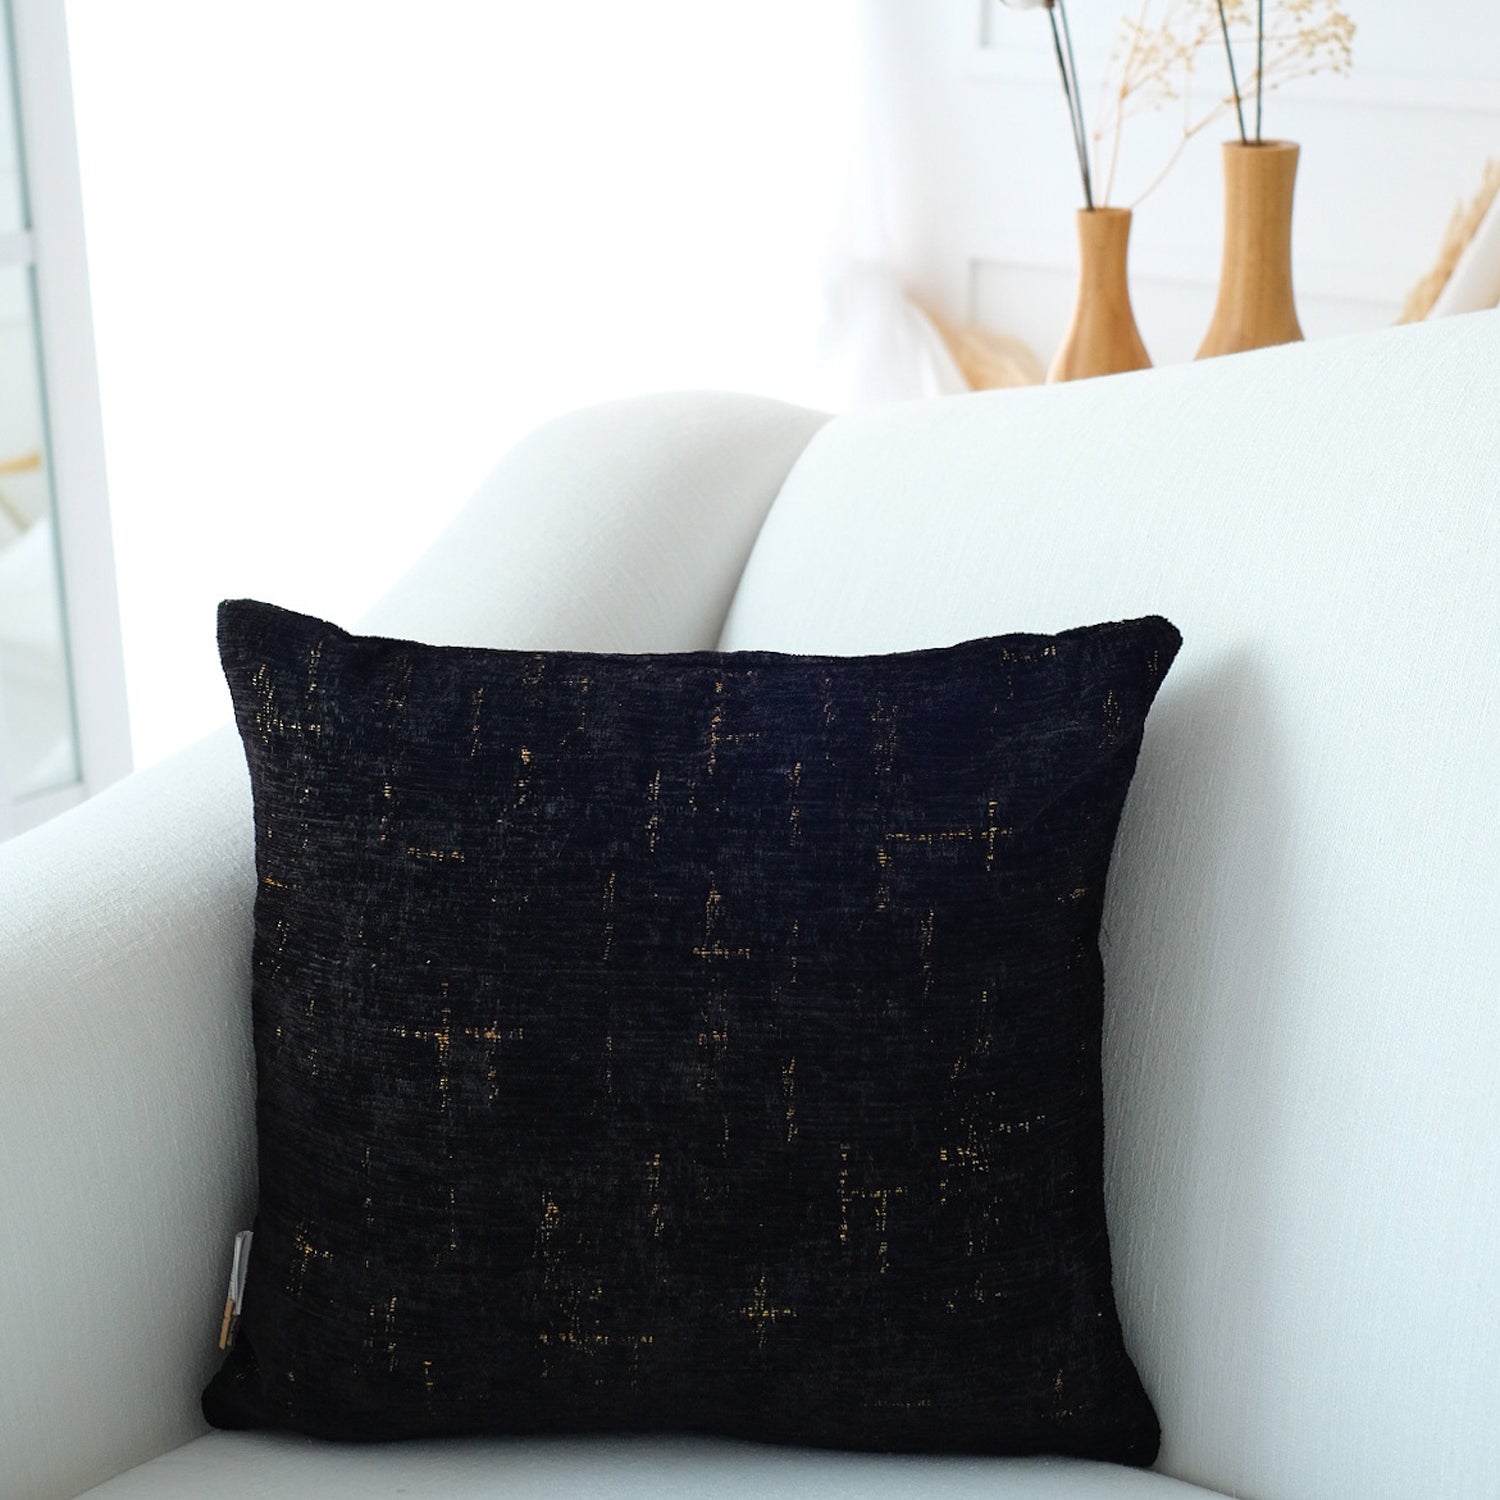 Decorative Black and Gold Chenille Throw Pillow